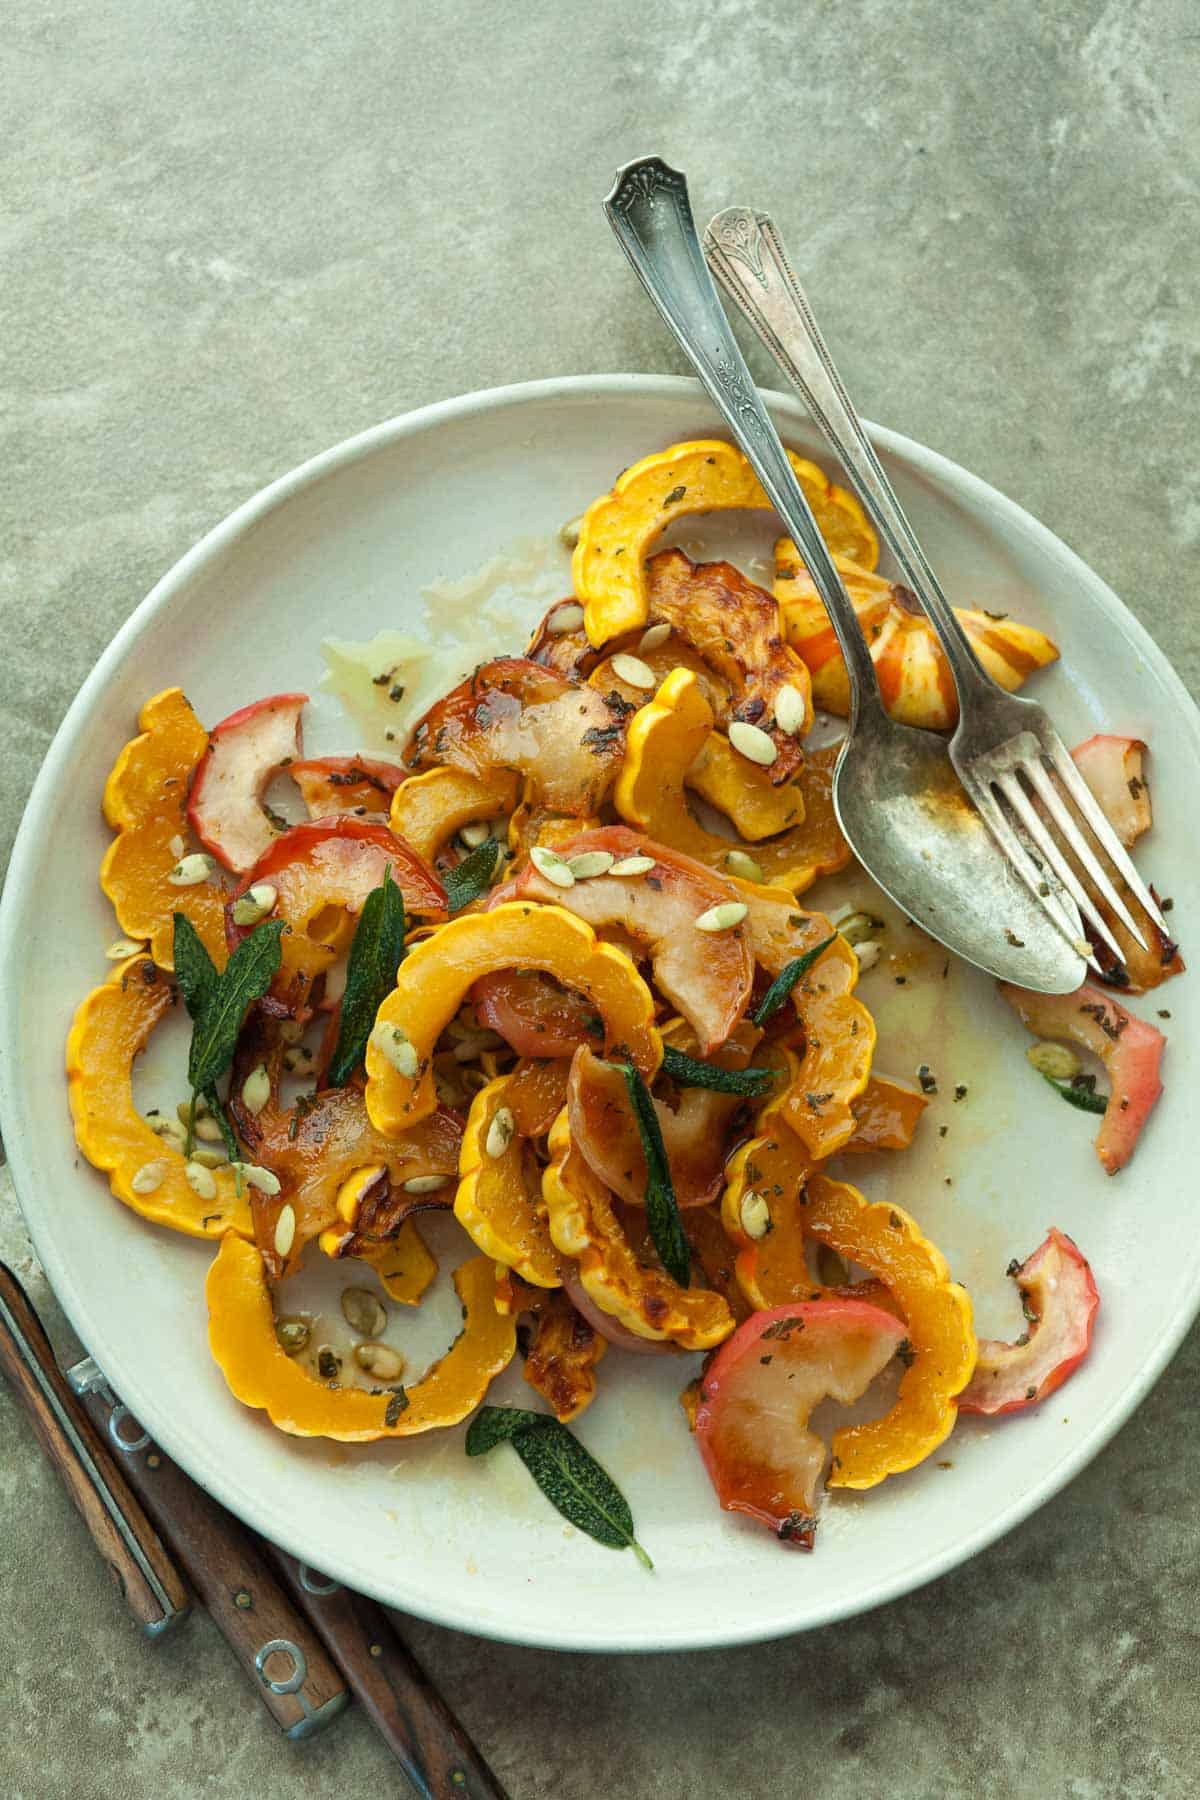 Roasted Delicata Squash on Plate with Serving Spoon